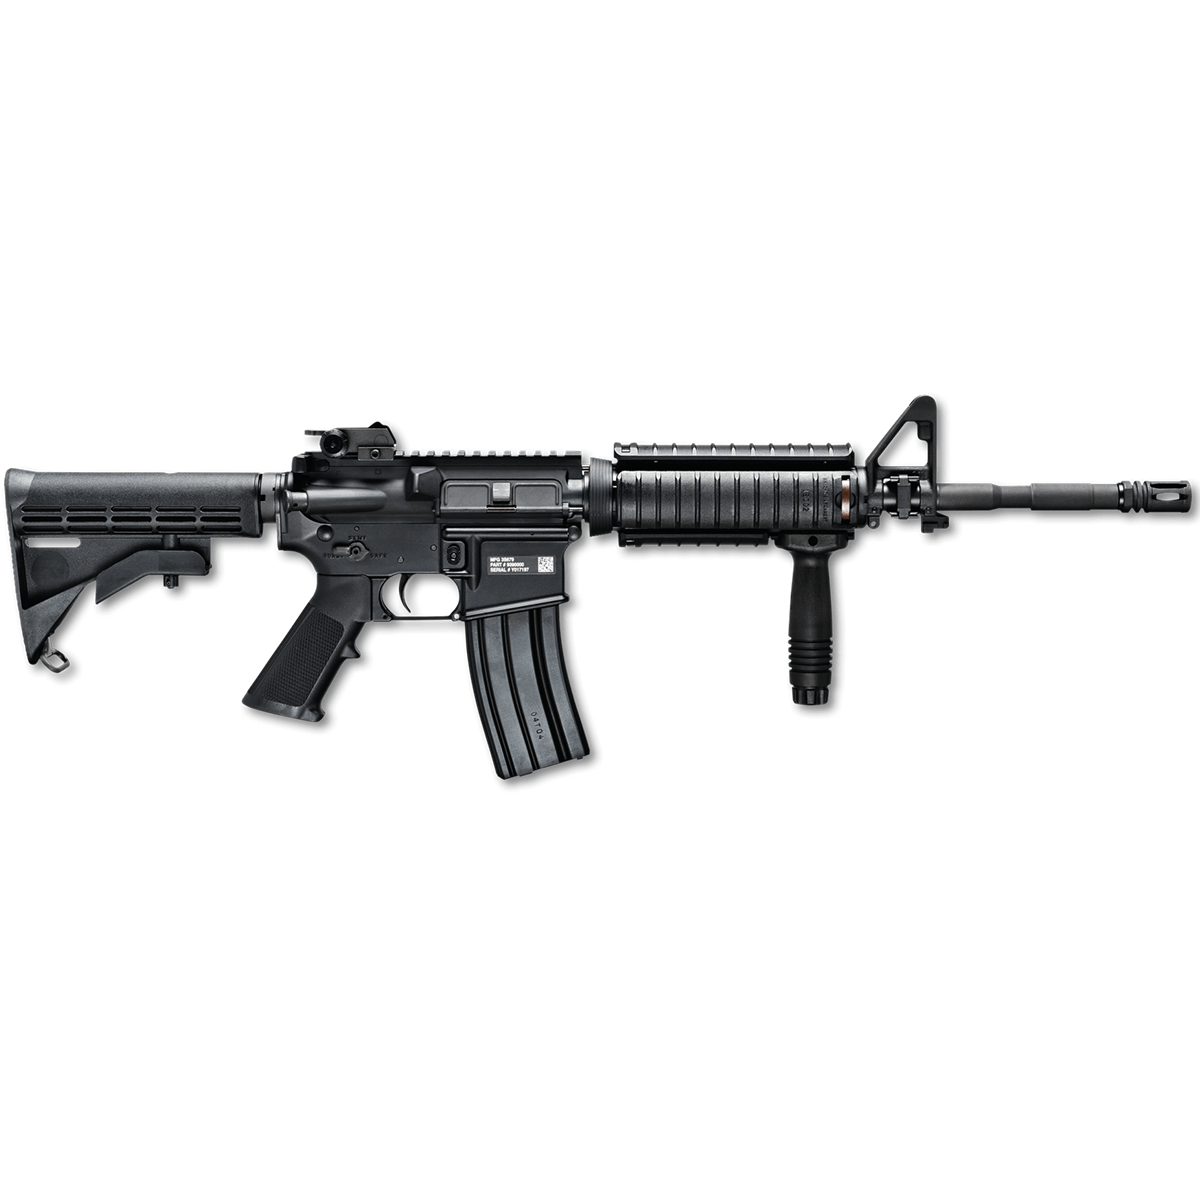 FN 36318 FN 15 M4 Military Collector 5.56x45mm AR-15 Semi Automatic Rifle -845737006211